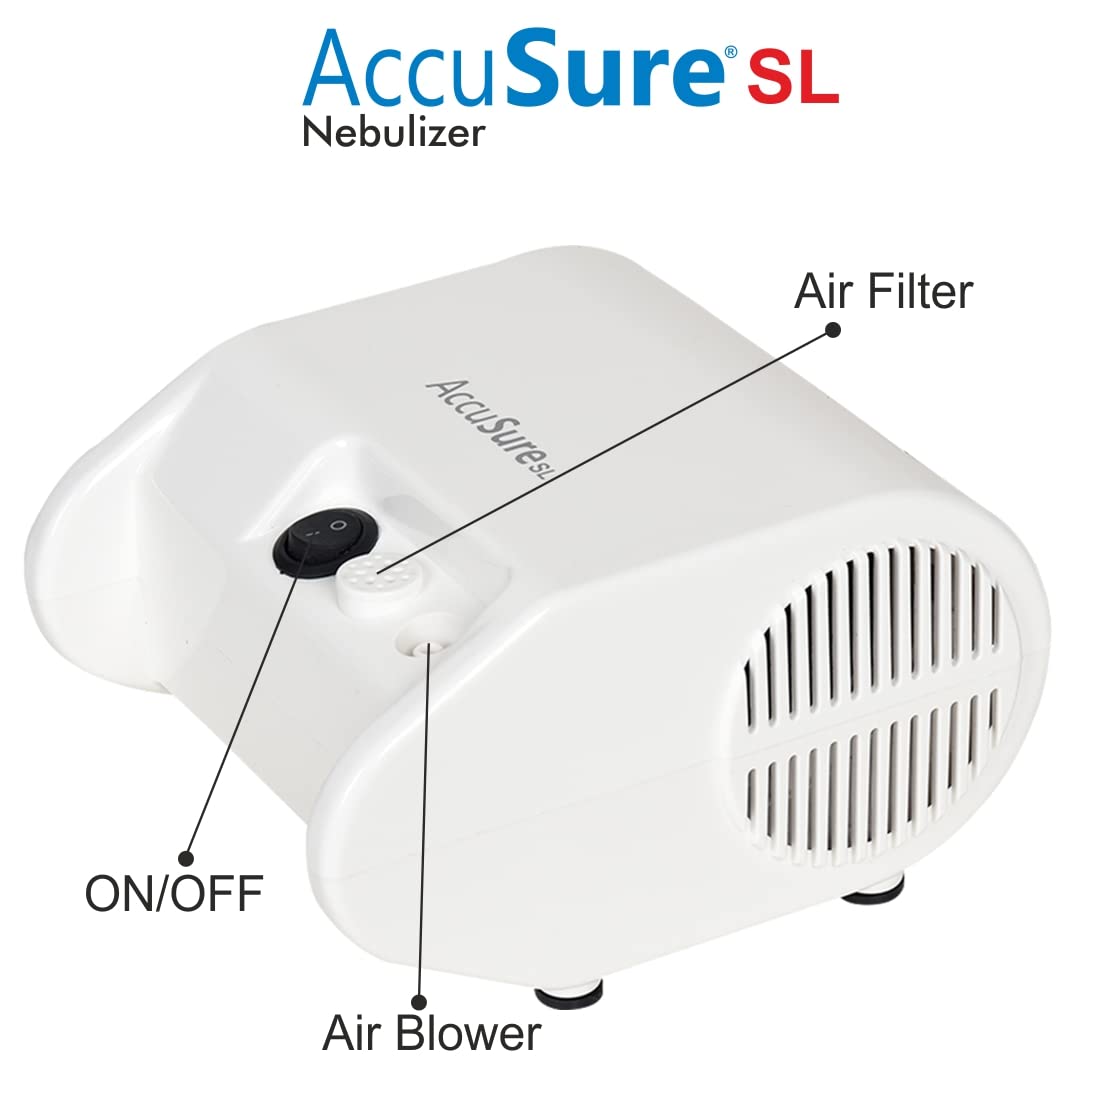 AccuSure SL White Compressor Complete Kit Nebulizer with Child and Adult Masks